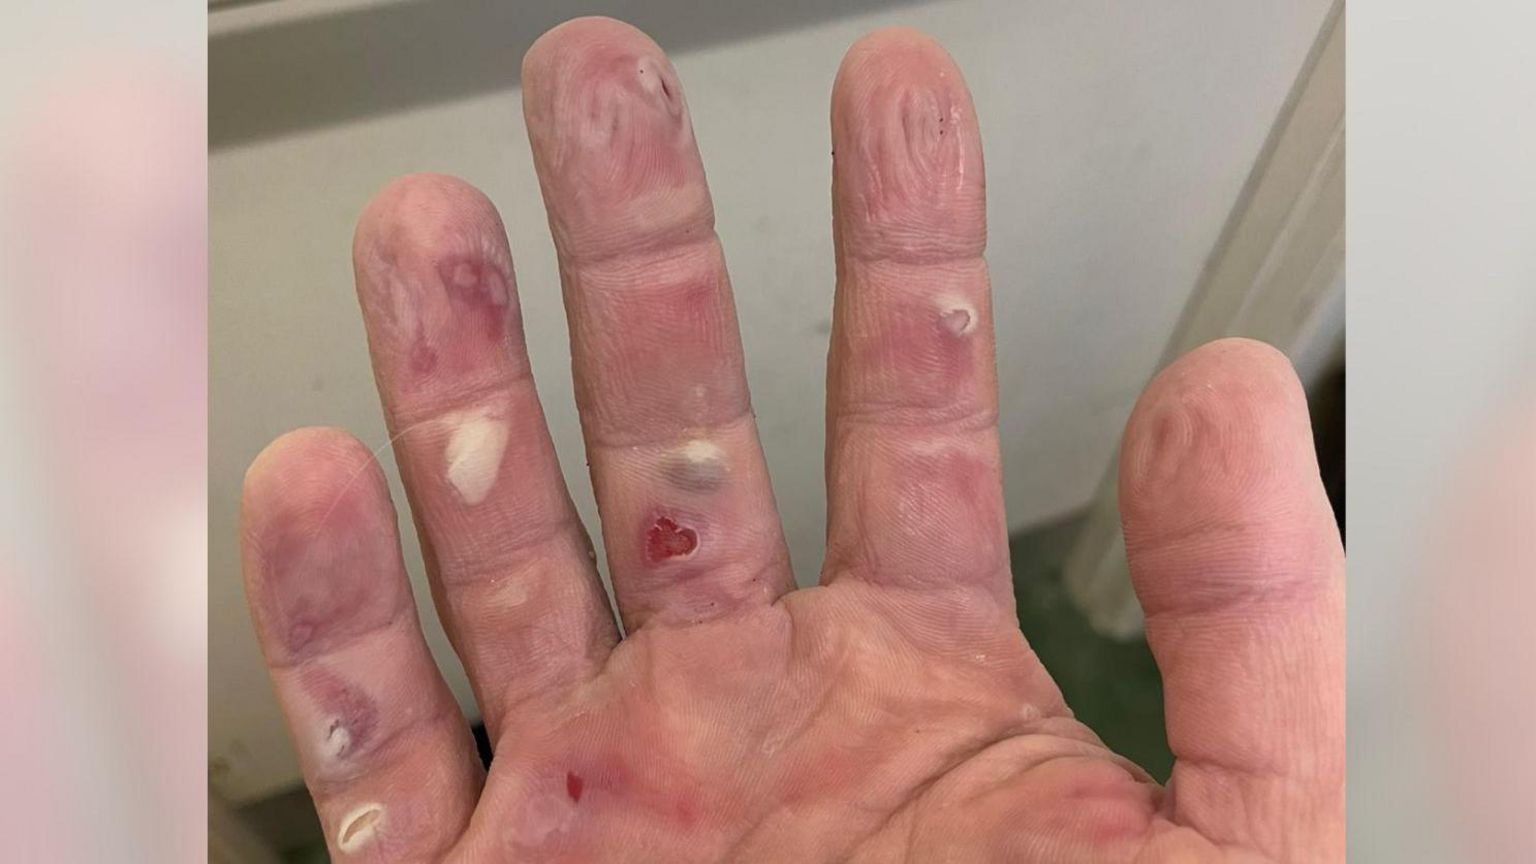 The palm of a man's right hand covered in blisters